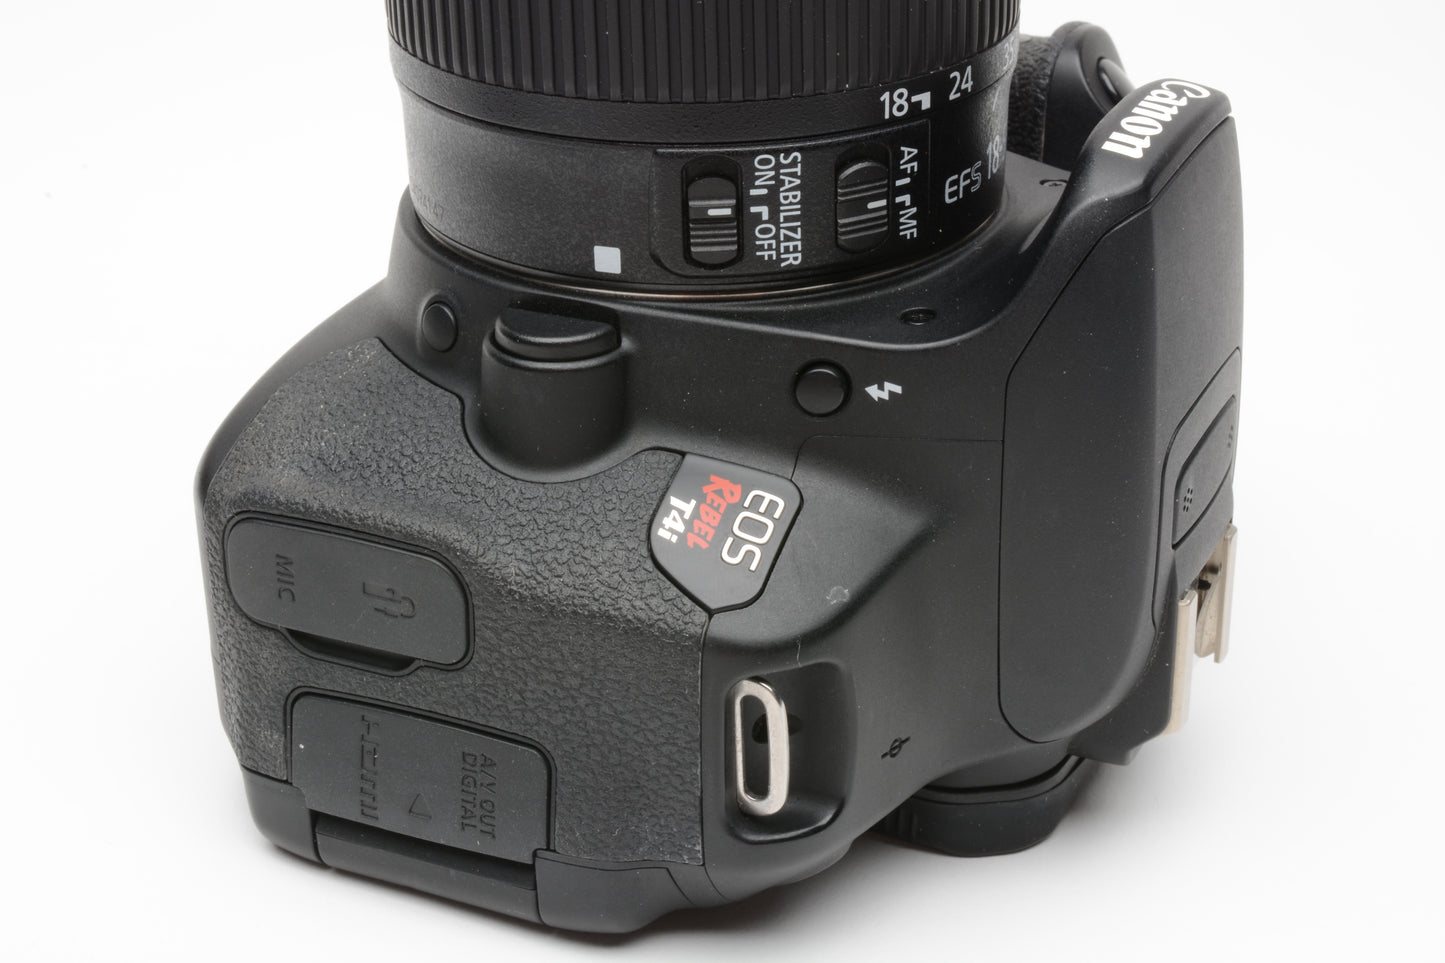 Canon T4i DSLR w/18-55mm f3.5-5.6 IS, batt+charger+strap, tested, clean, 12,784 Acts!